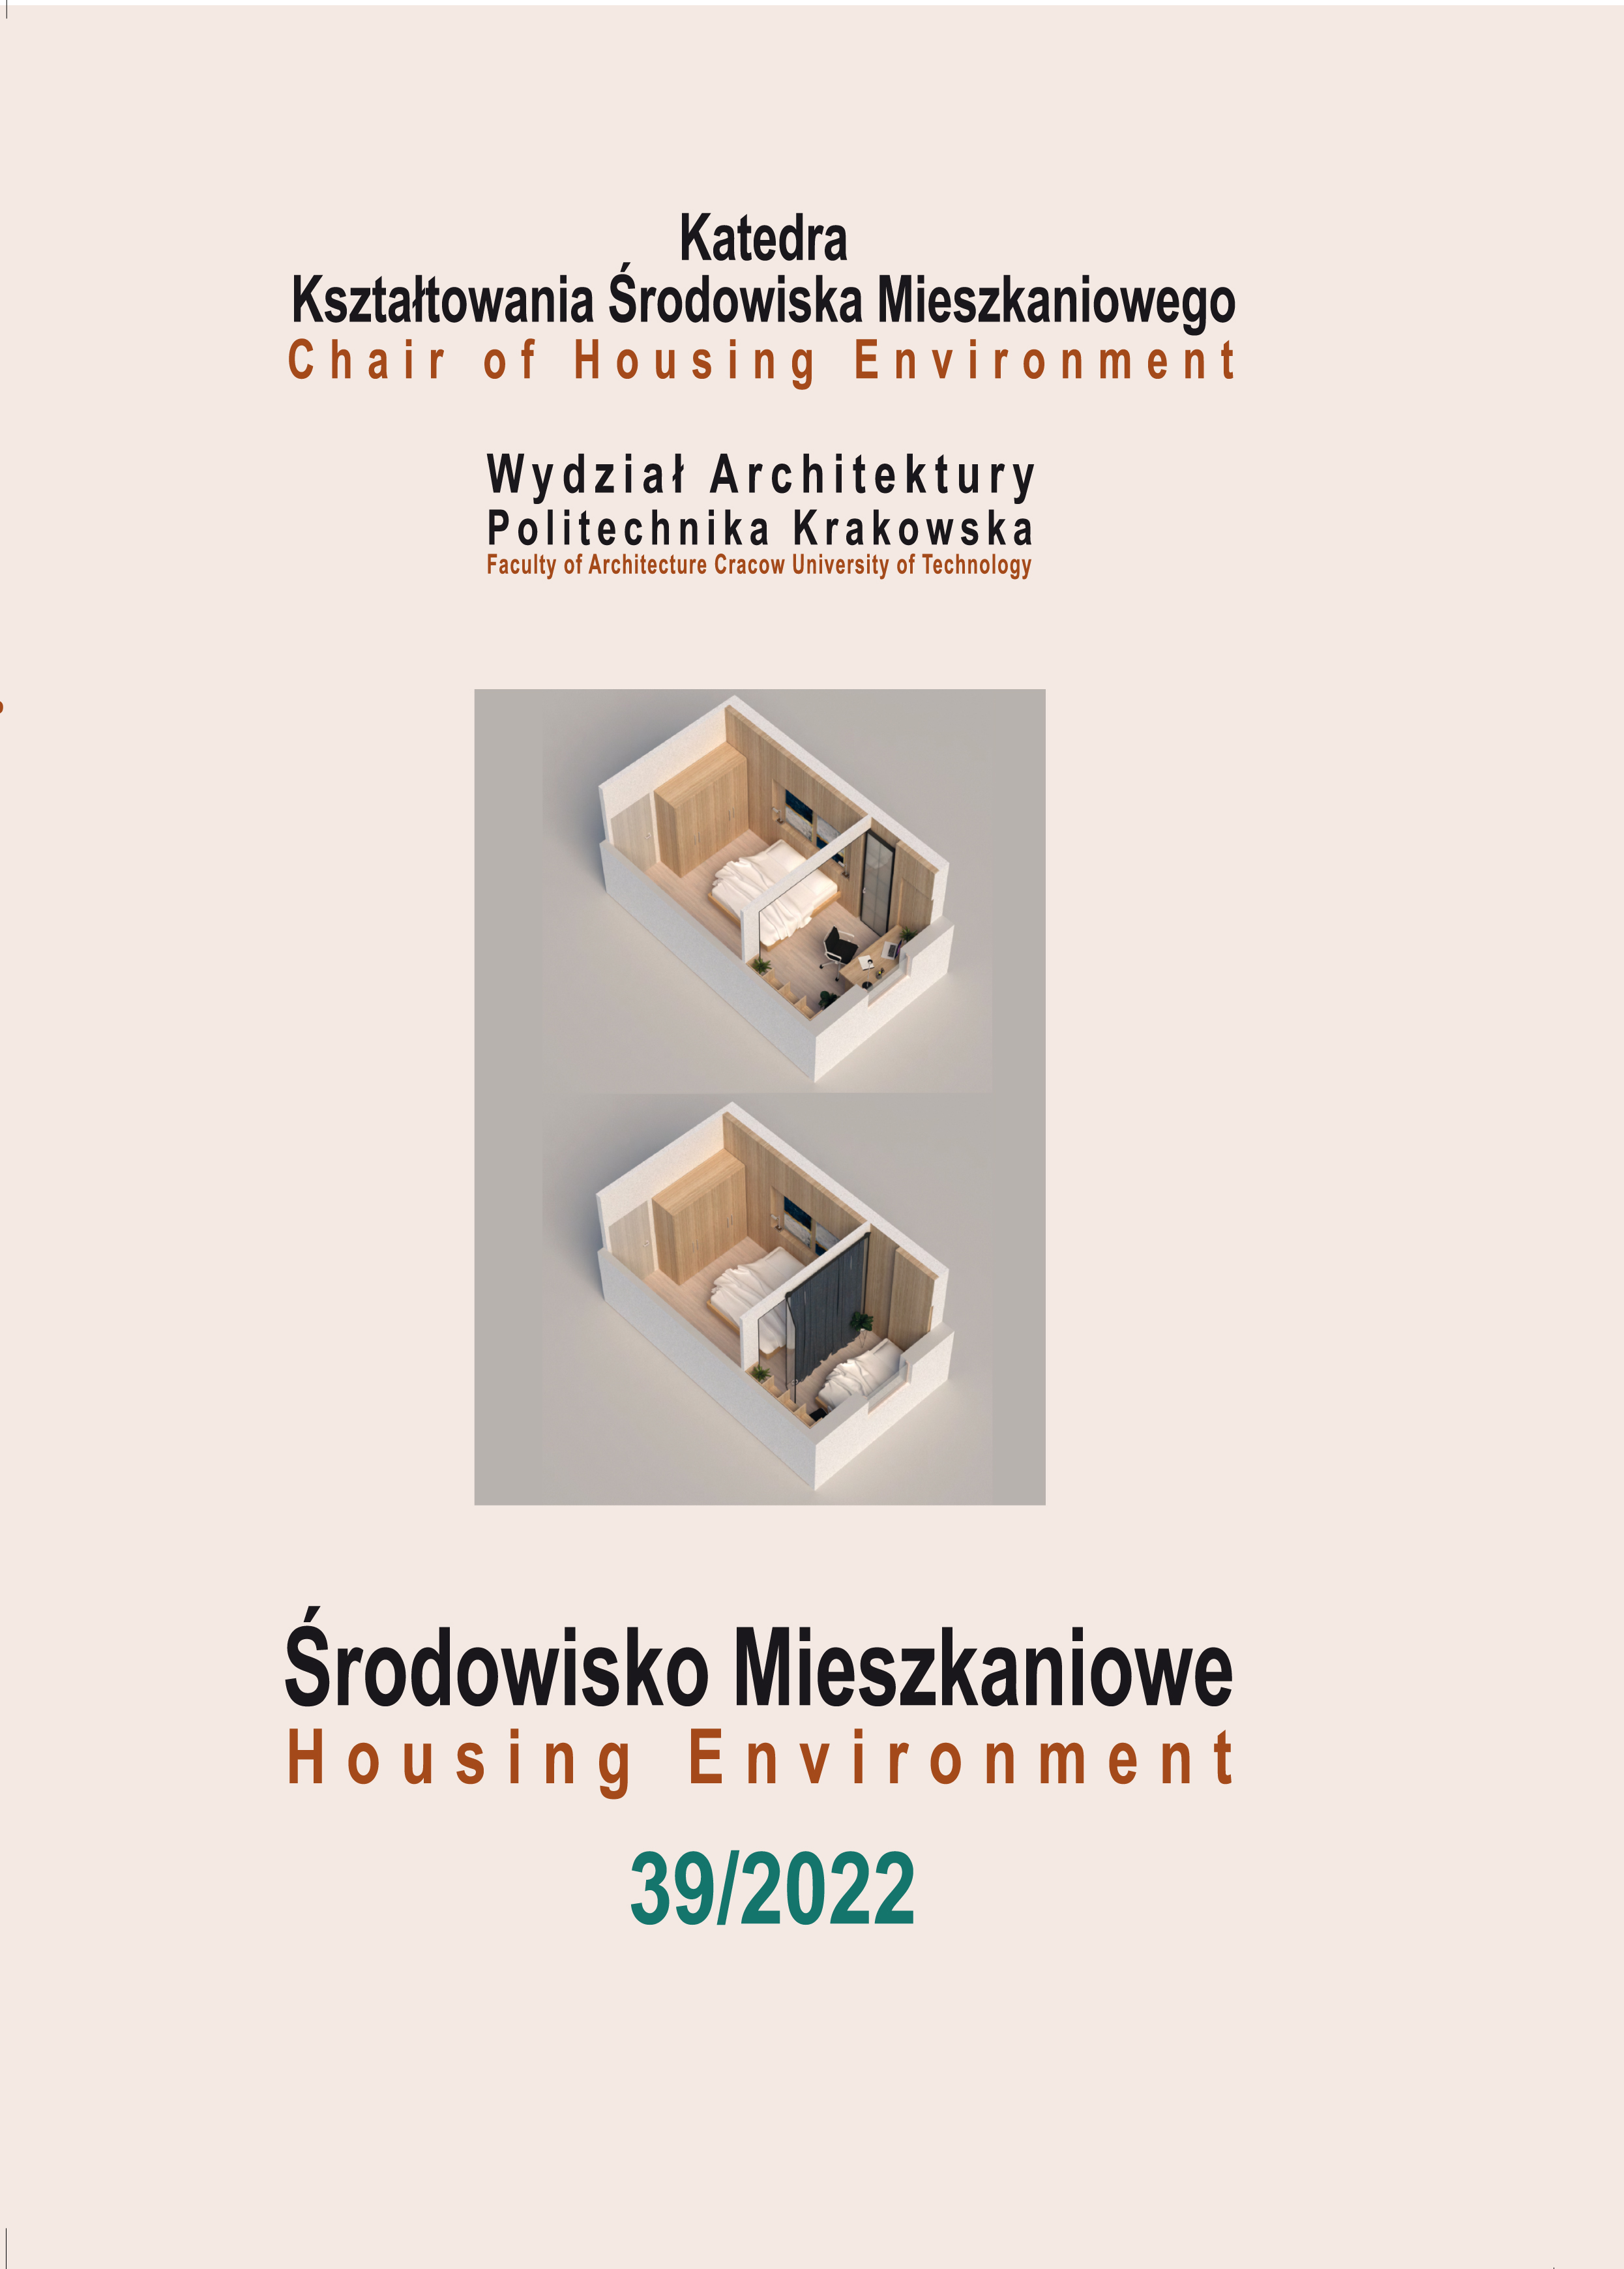 The Paradigm Change. Environmental Aspects as Transformative Imperative in the Housing Environment Cover Image